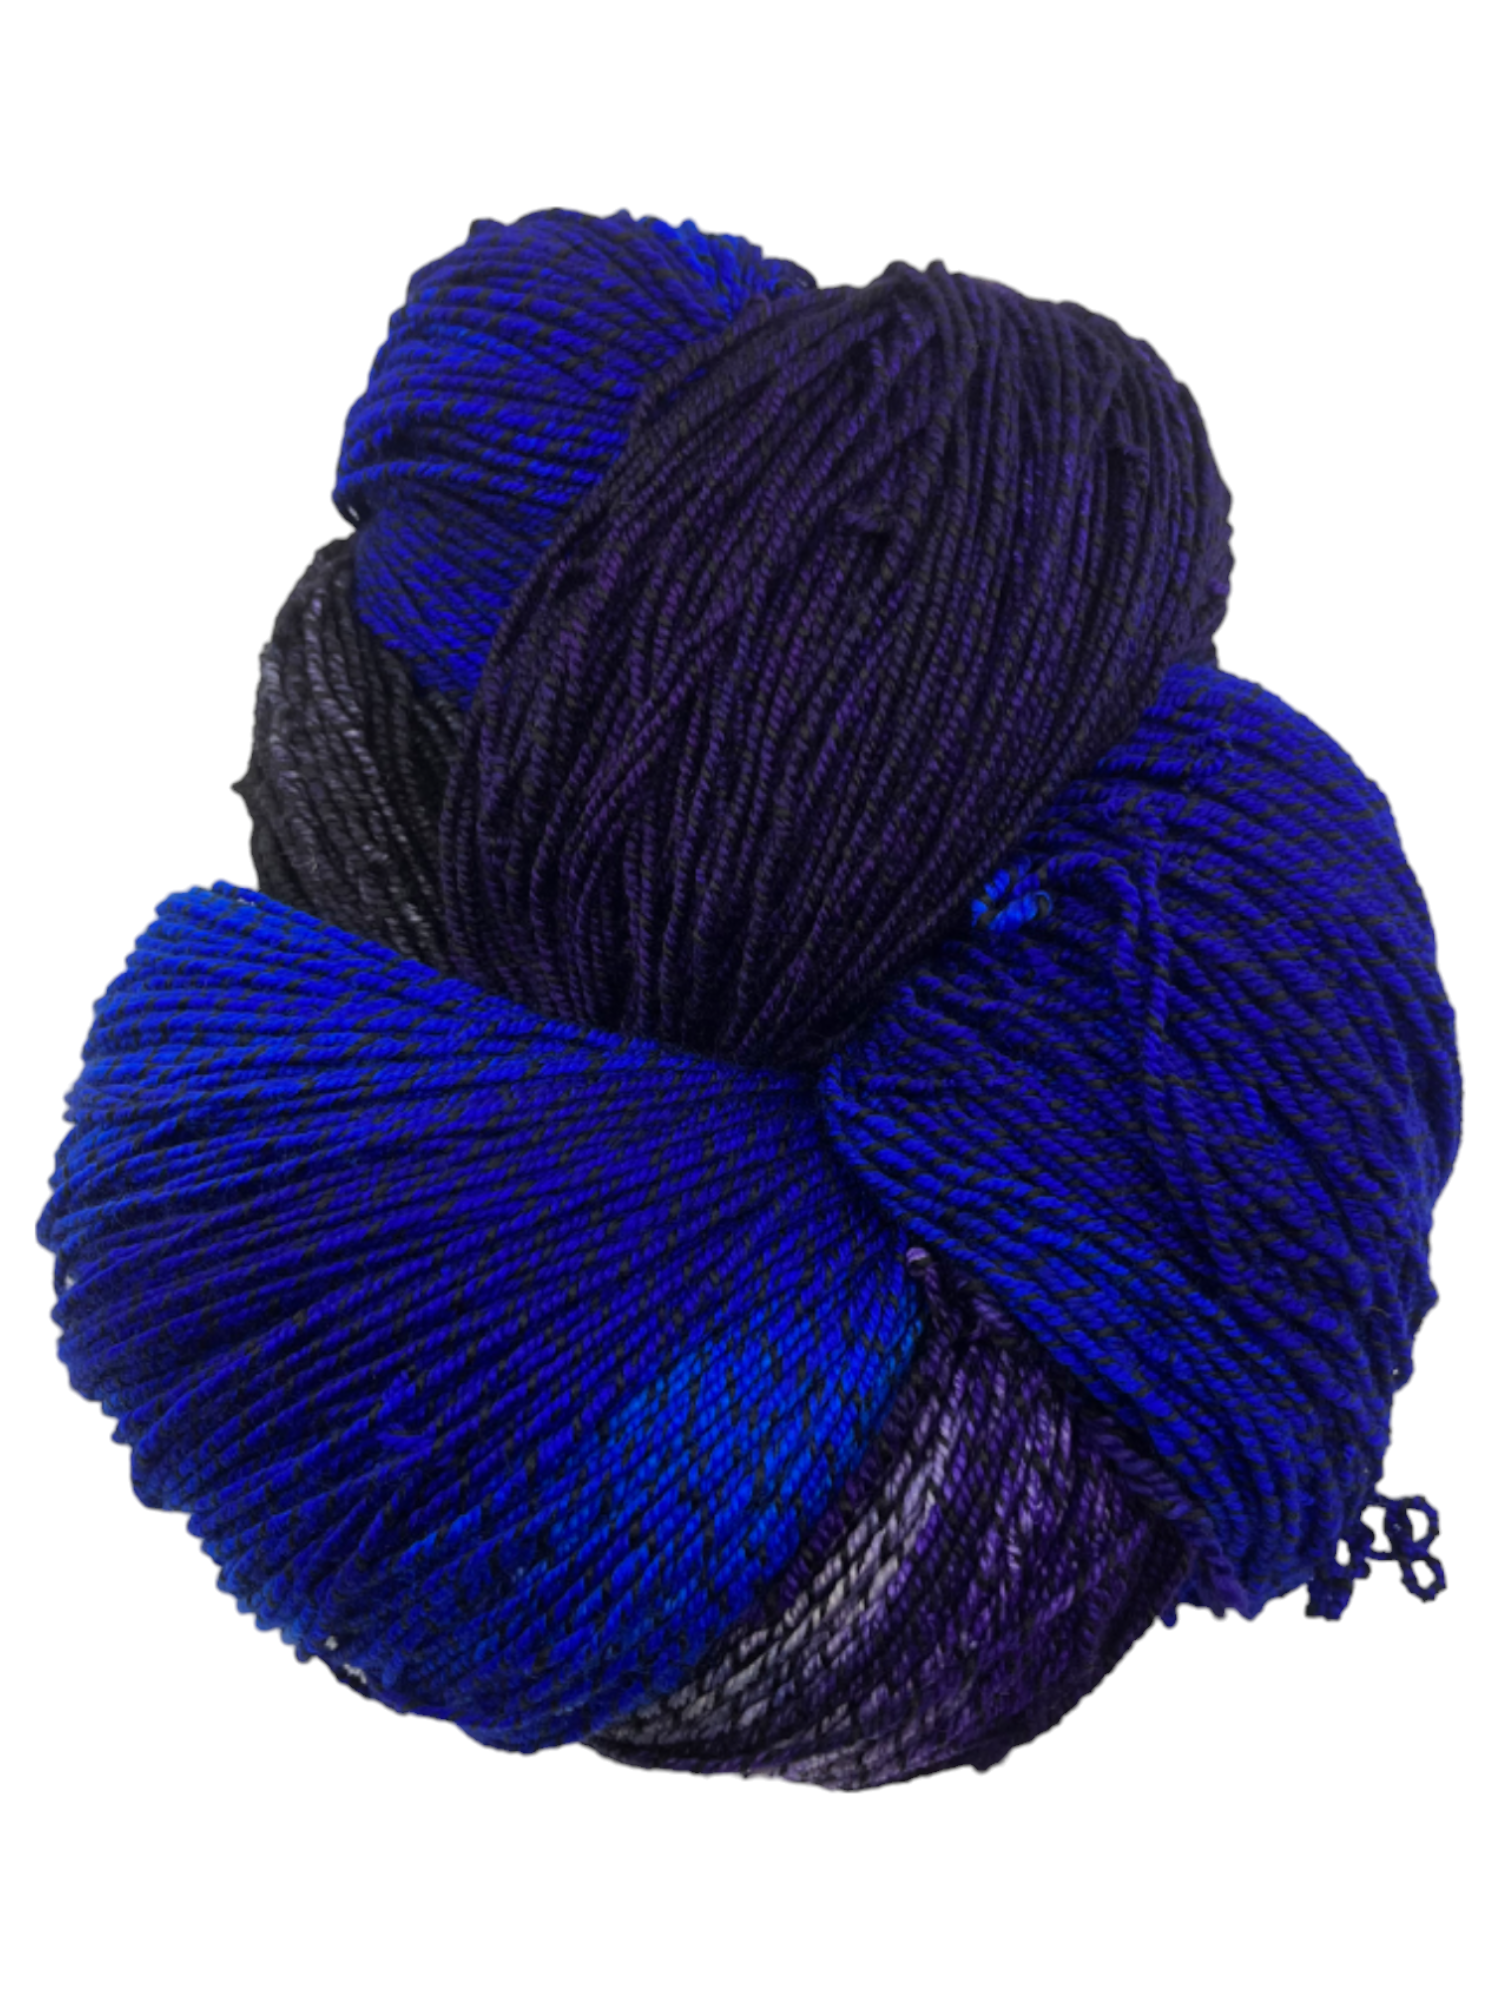 Nightshade Worsted Queen Size 46